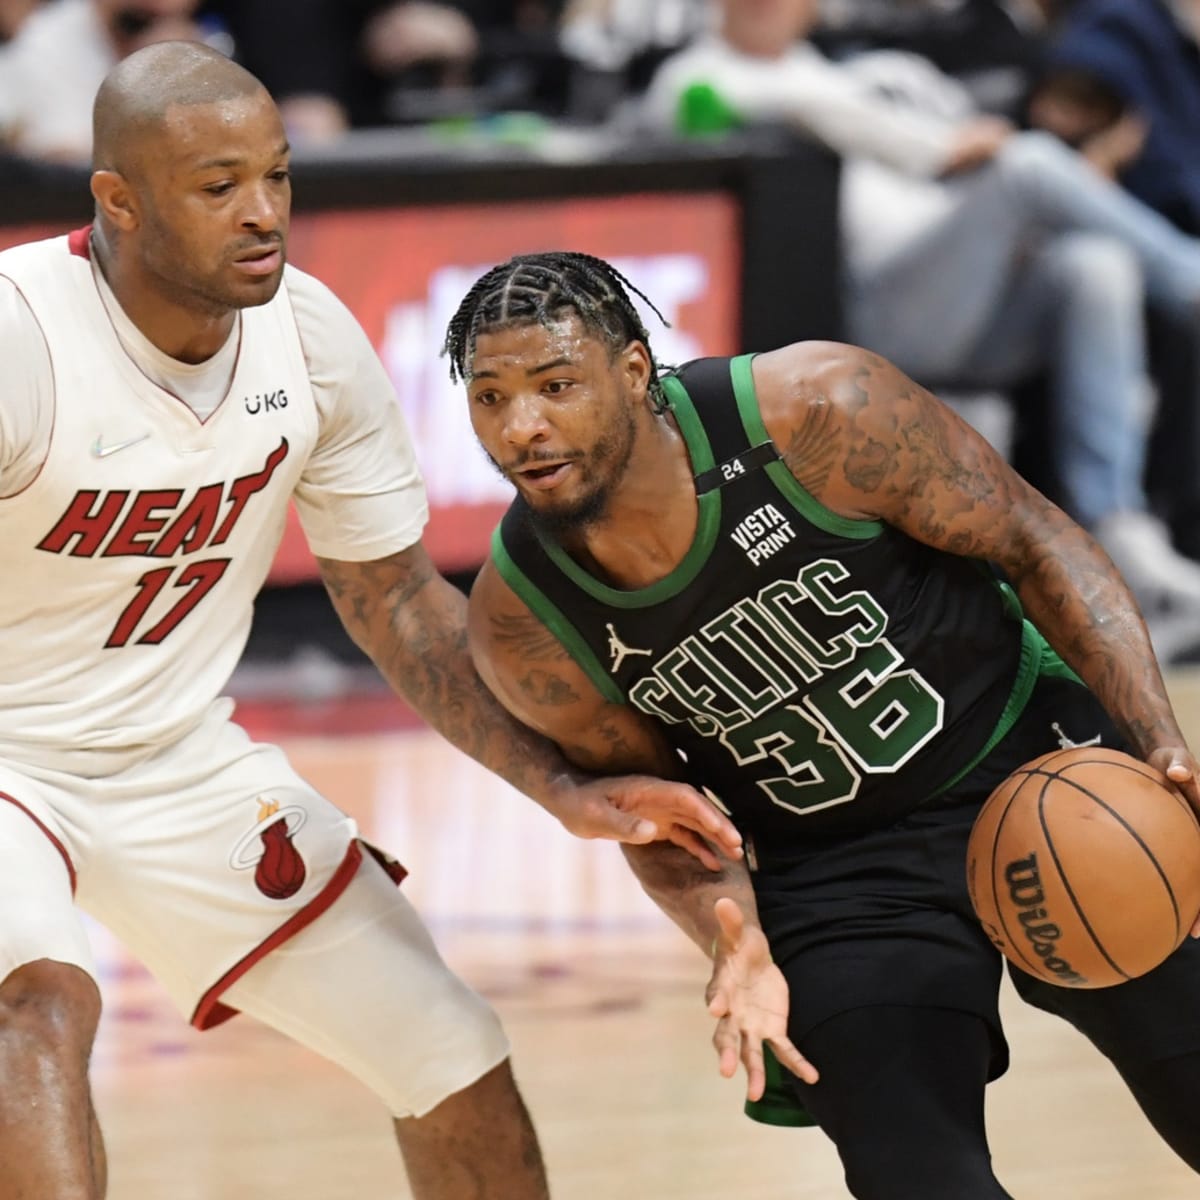 Miami Heat: Why P.J. Tucker is not the answer at power forward